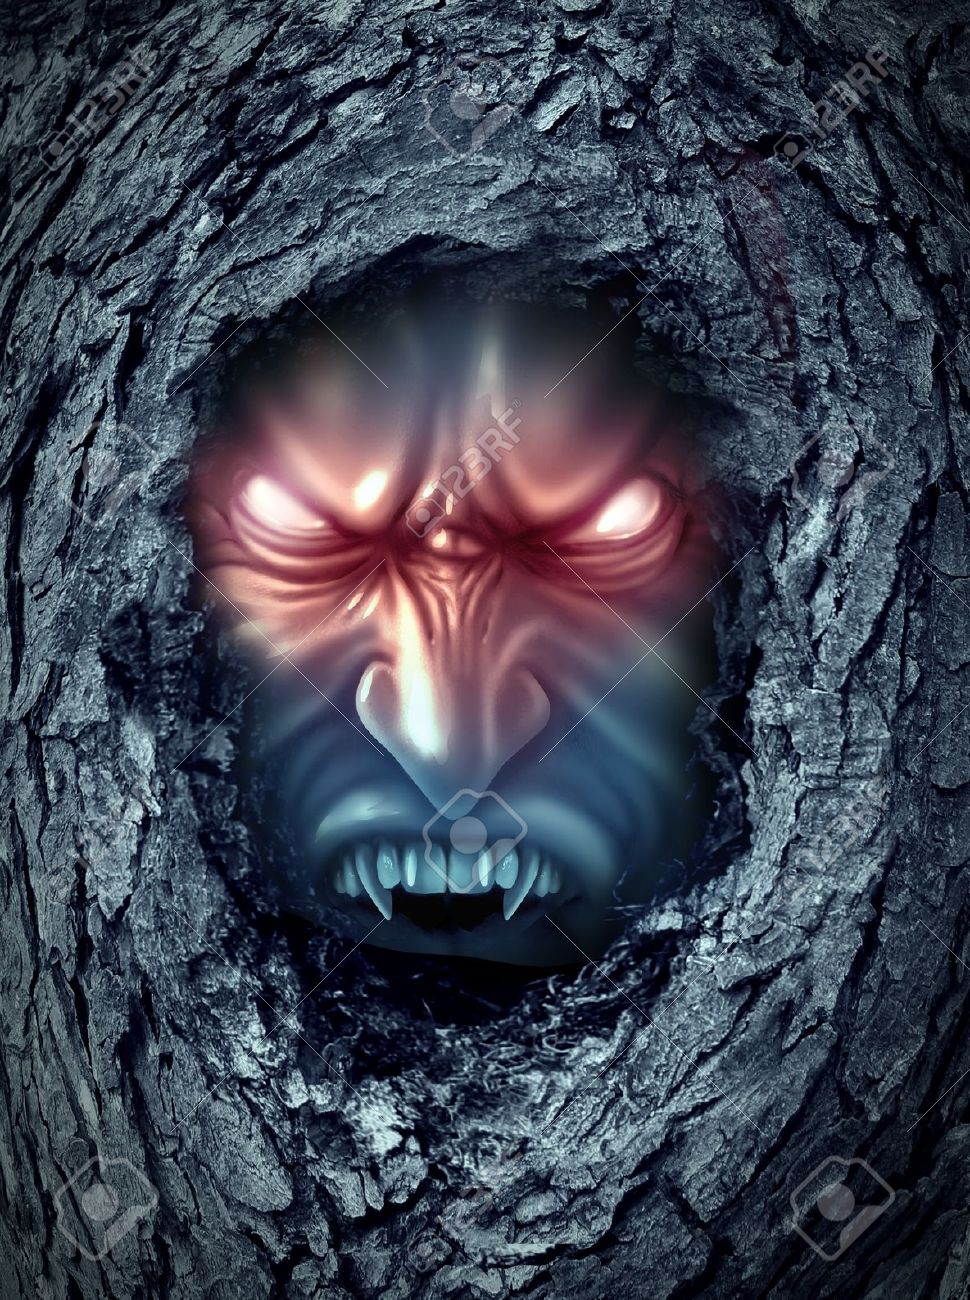 19986425-Vampire-zombie-ghost-with-glowing-evil-eyes-living-inside-a-dark-old-haunted-tree-trunk-as-a-hallowe-Stock-Photo.jpg